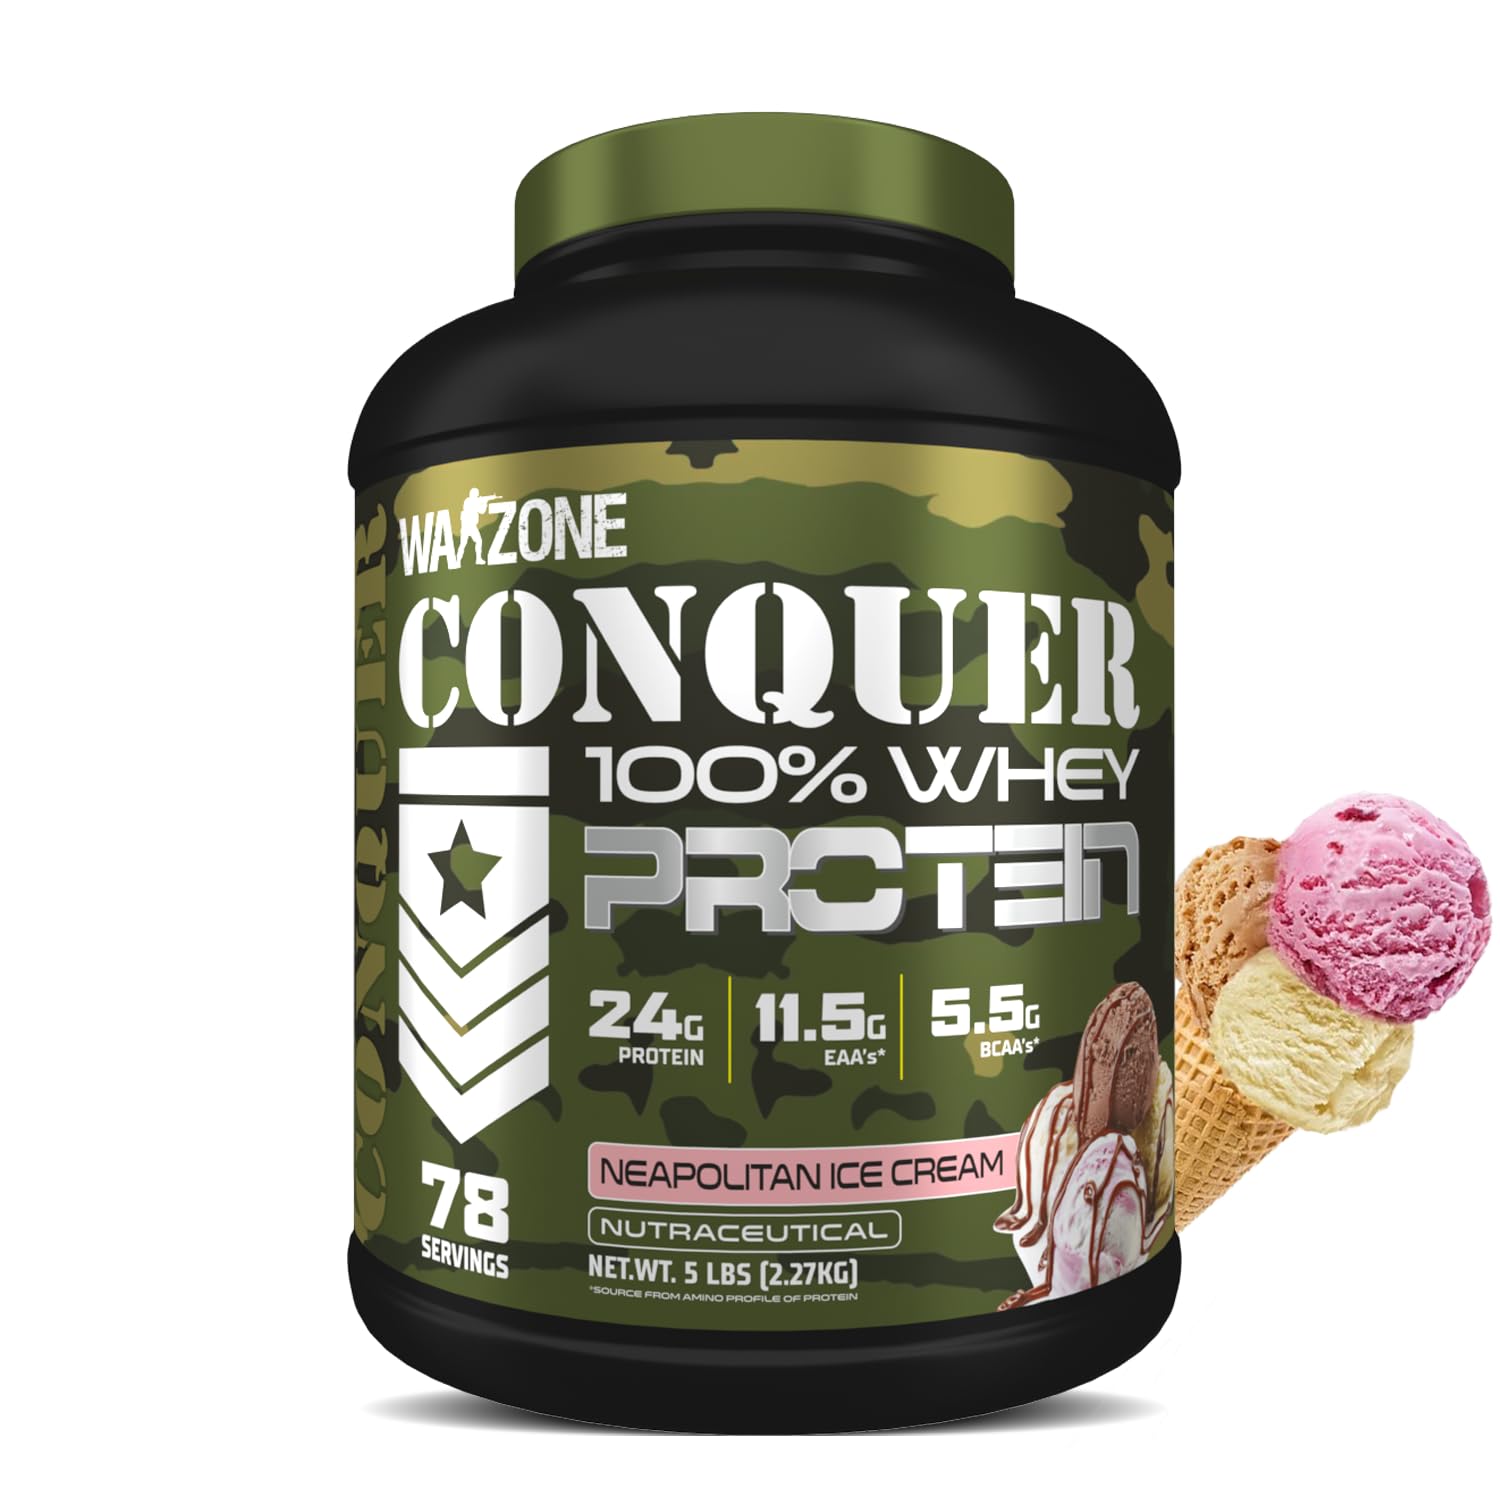 Warzone Conquer 100% Whey Protein